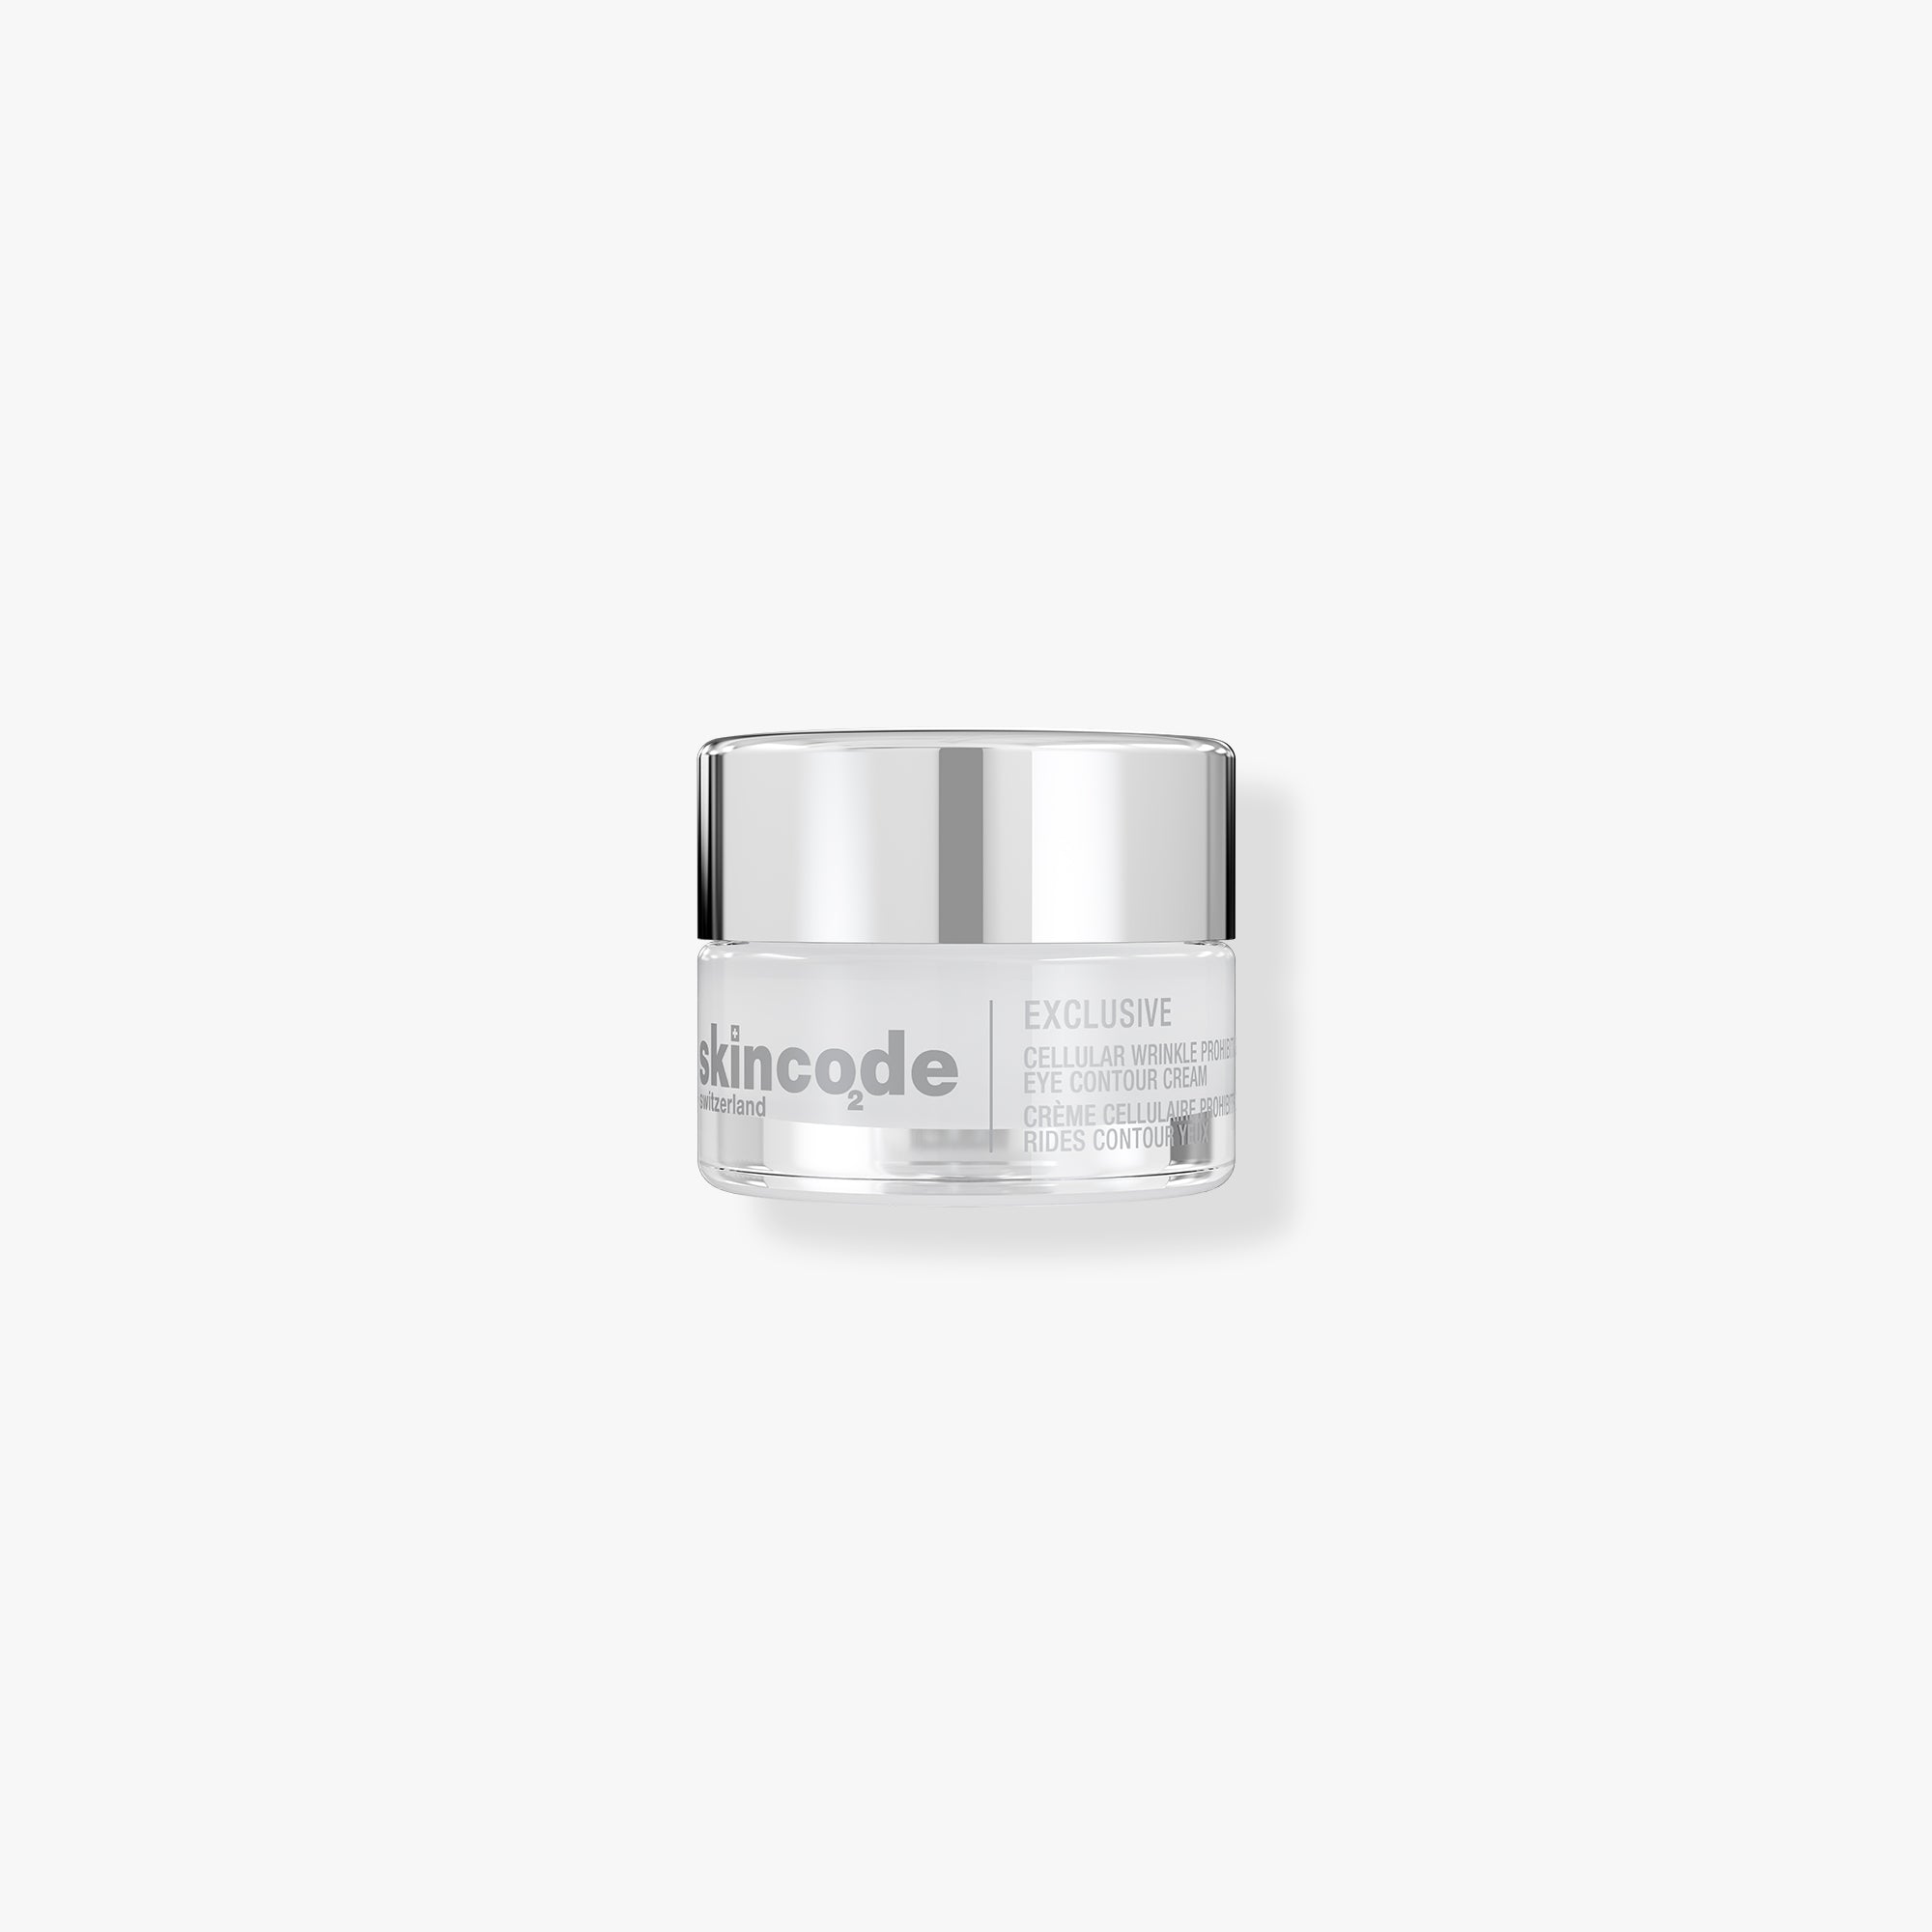 SkinCode Exclusive, Cellular Wrinkle Prohibiting Eye Contour Cream